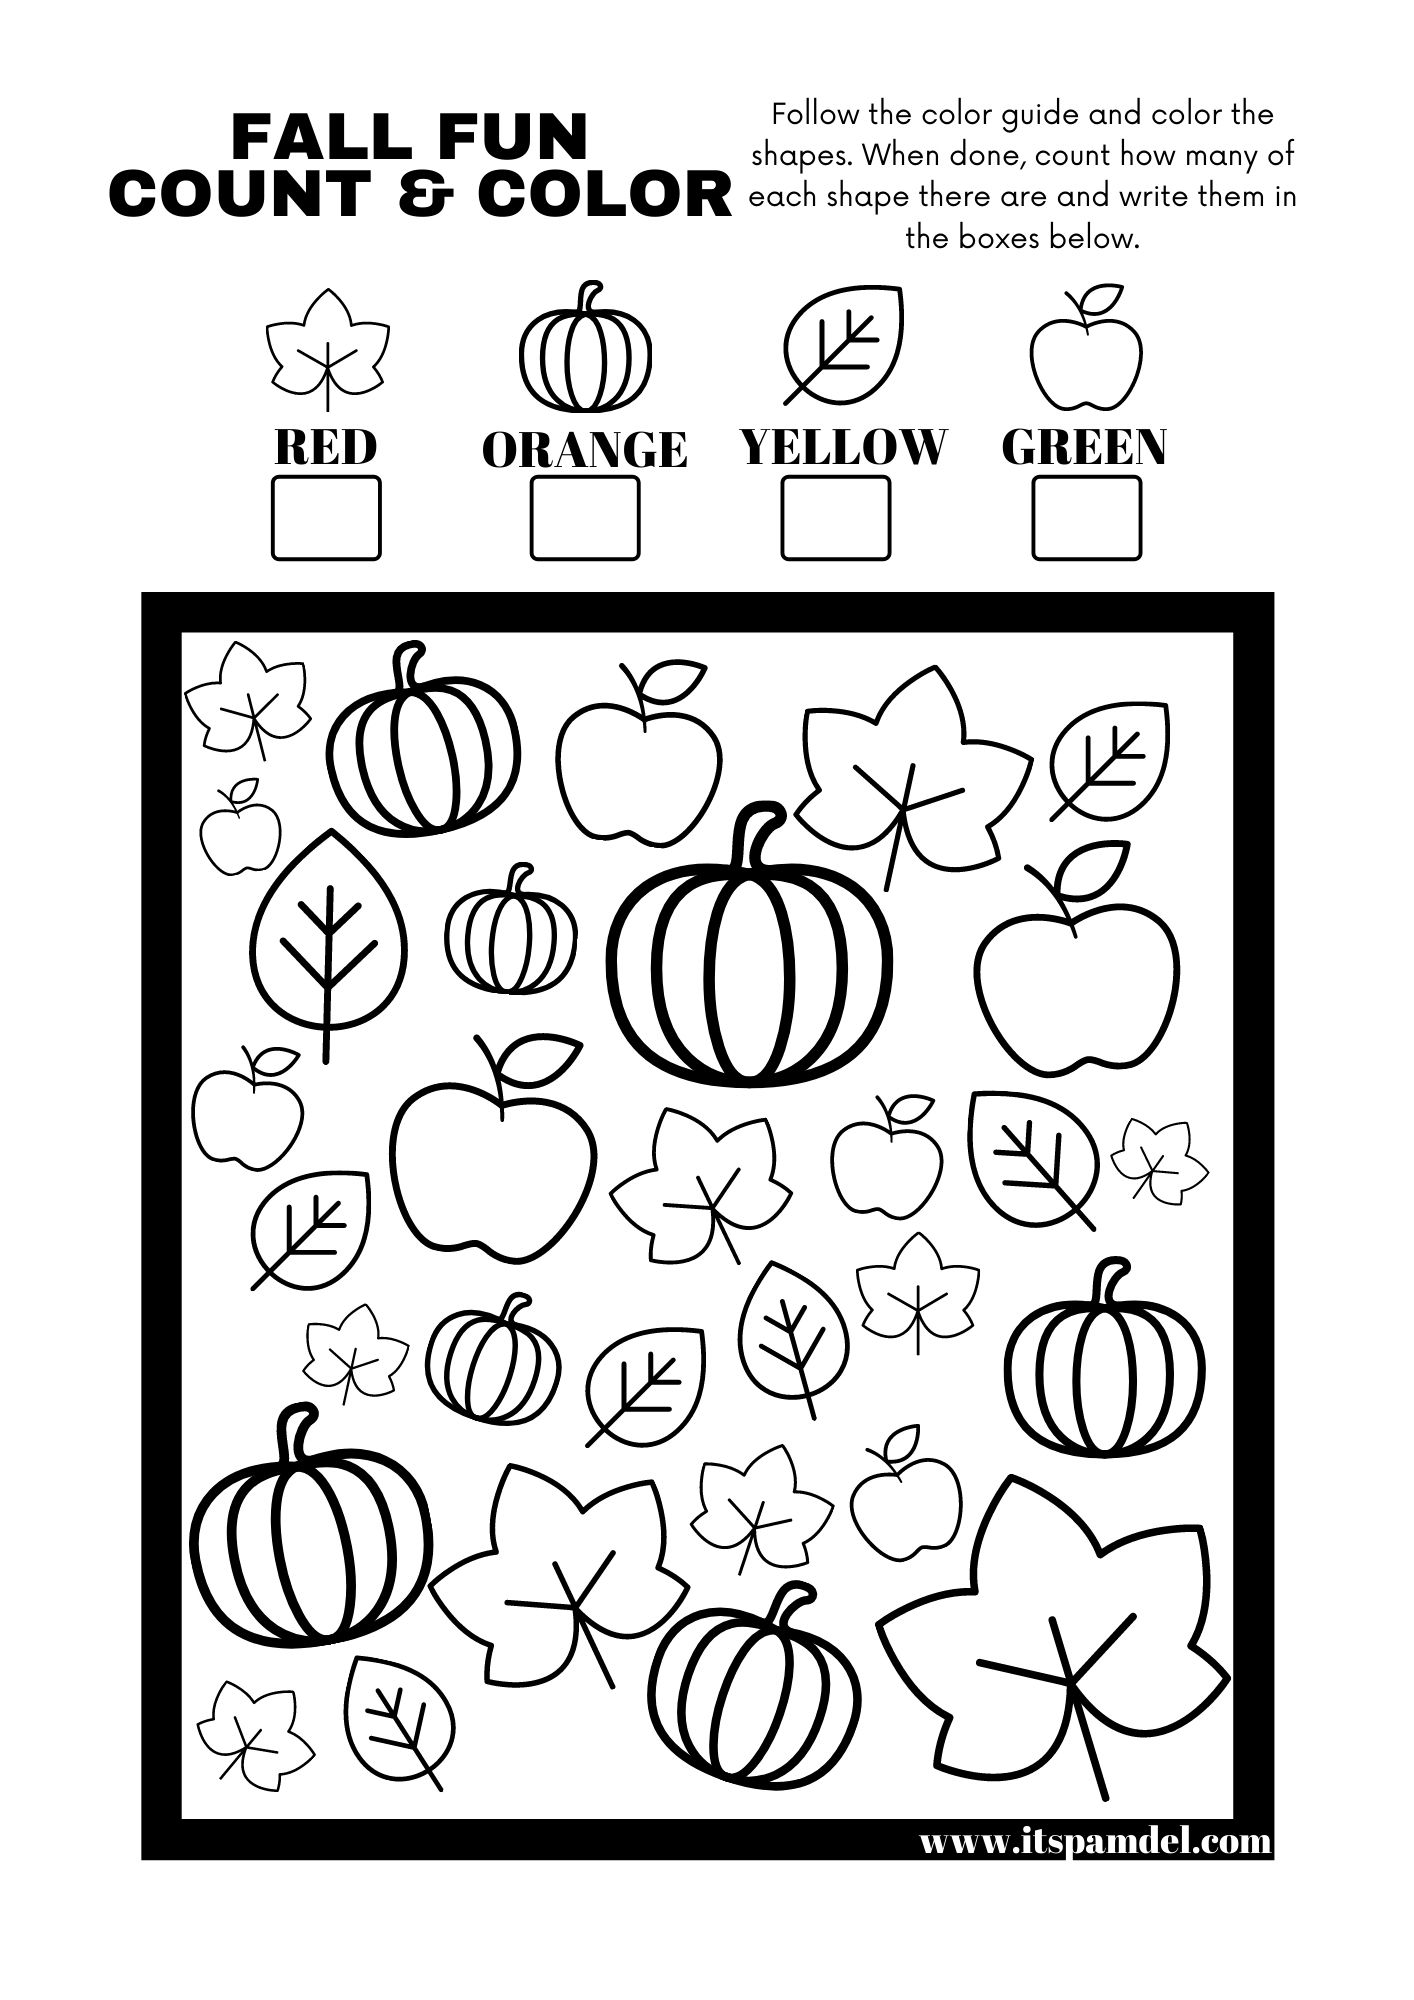 Free Printable Fall Fun I Spy Count and Color Activity Page for Kids